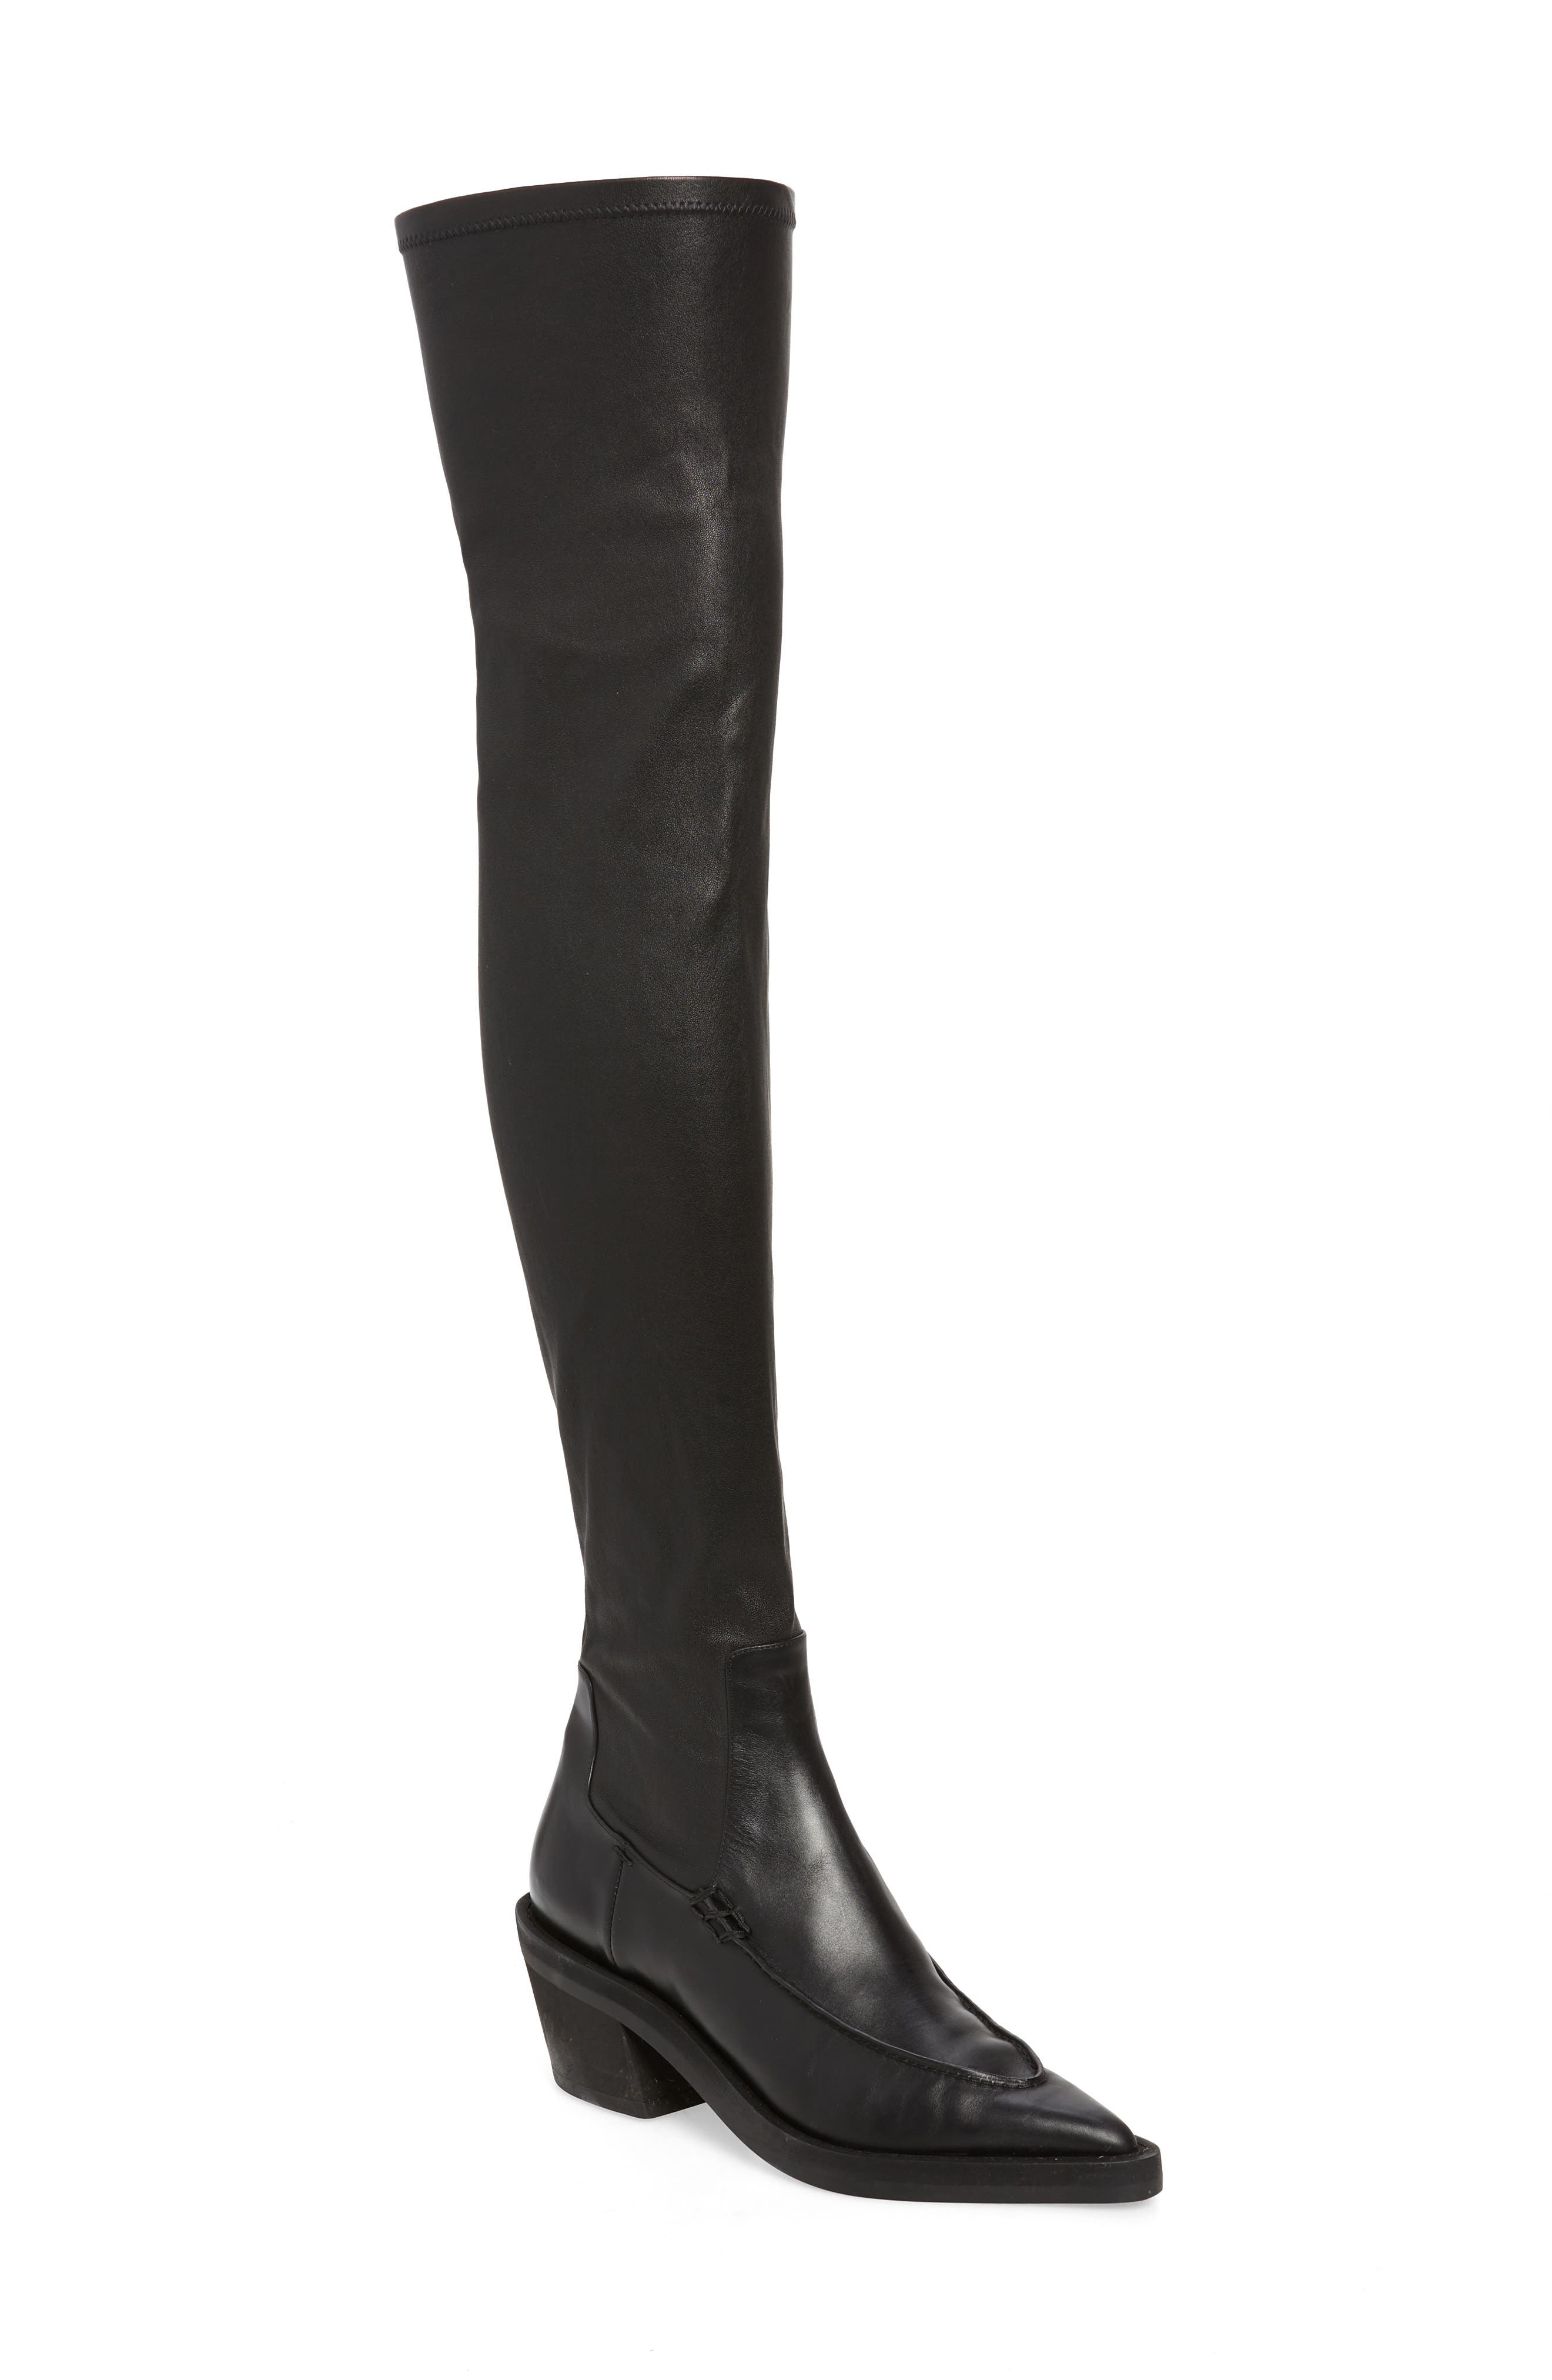 Womens Thigh High Riding Boots Over The Knee Flat Block Low Heel Booties Shoes 